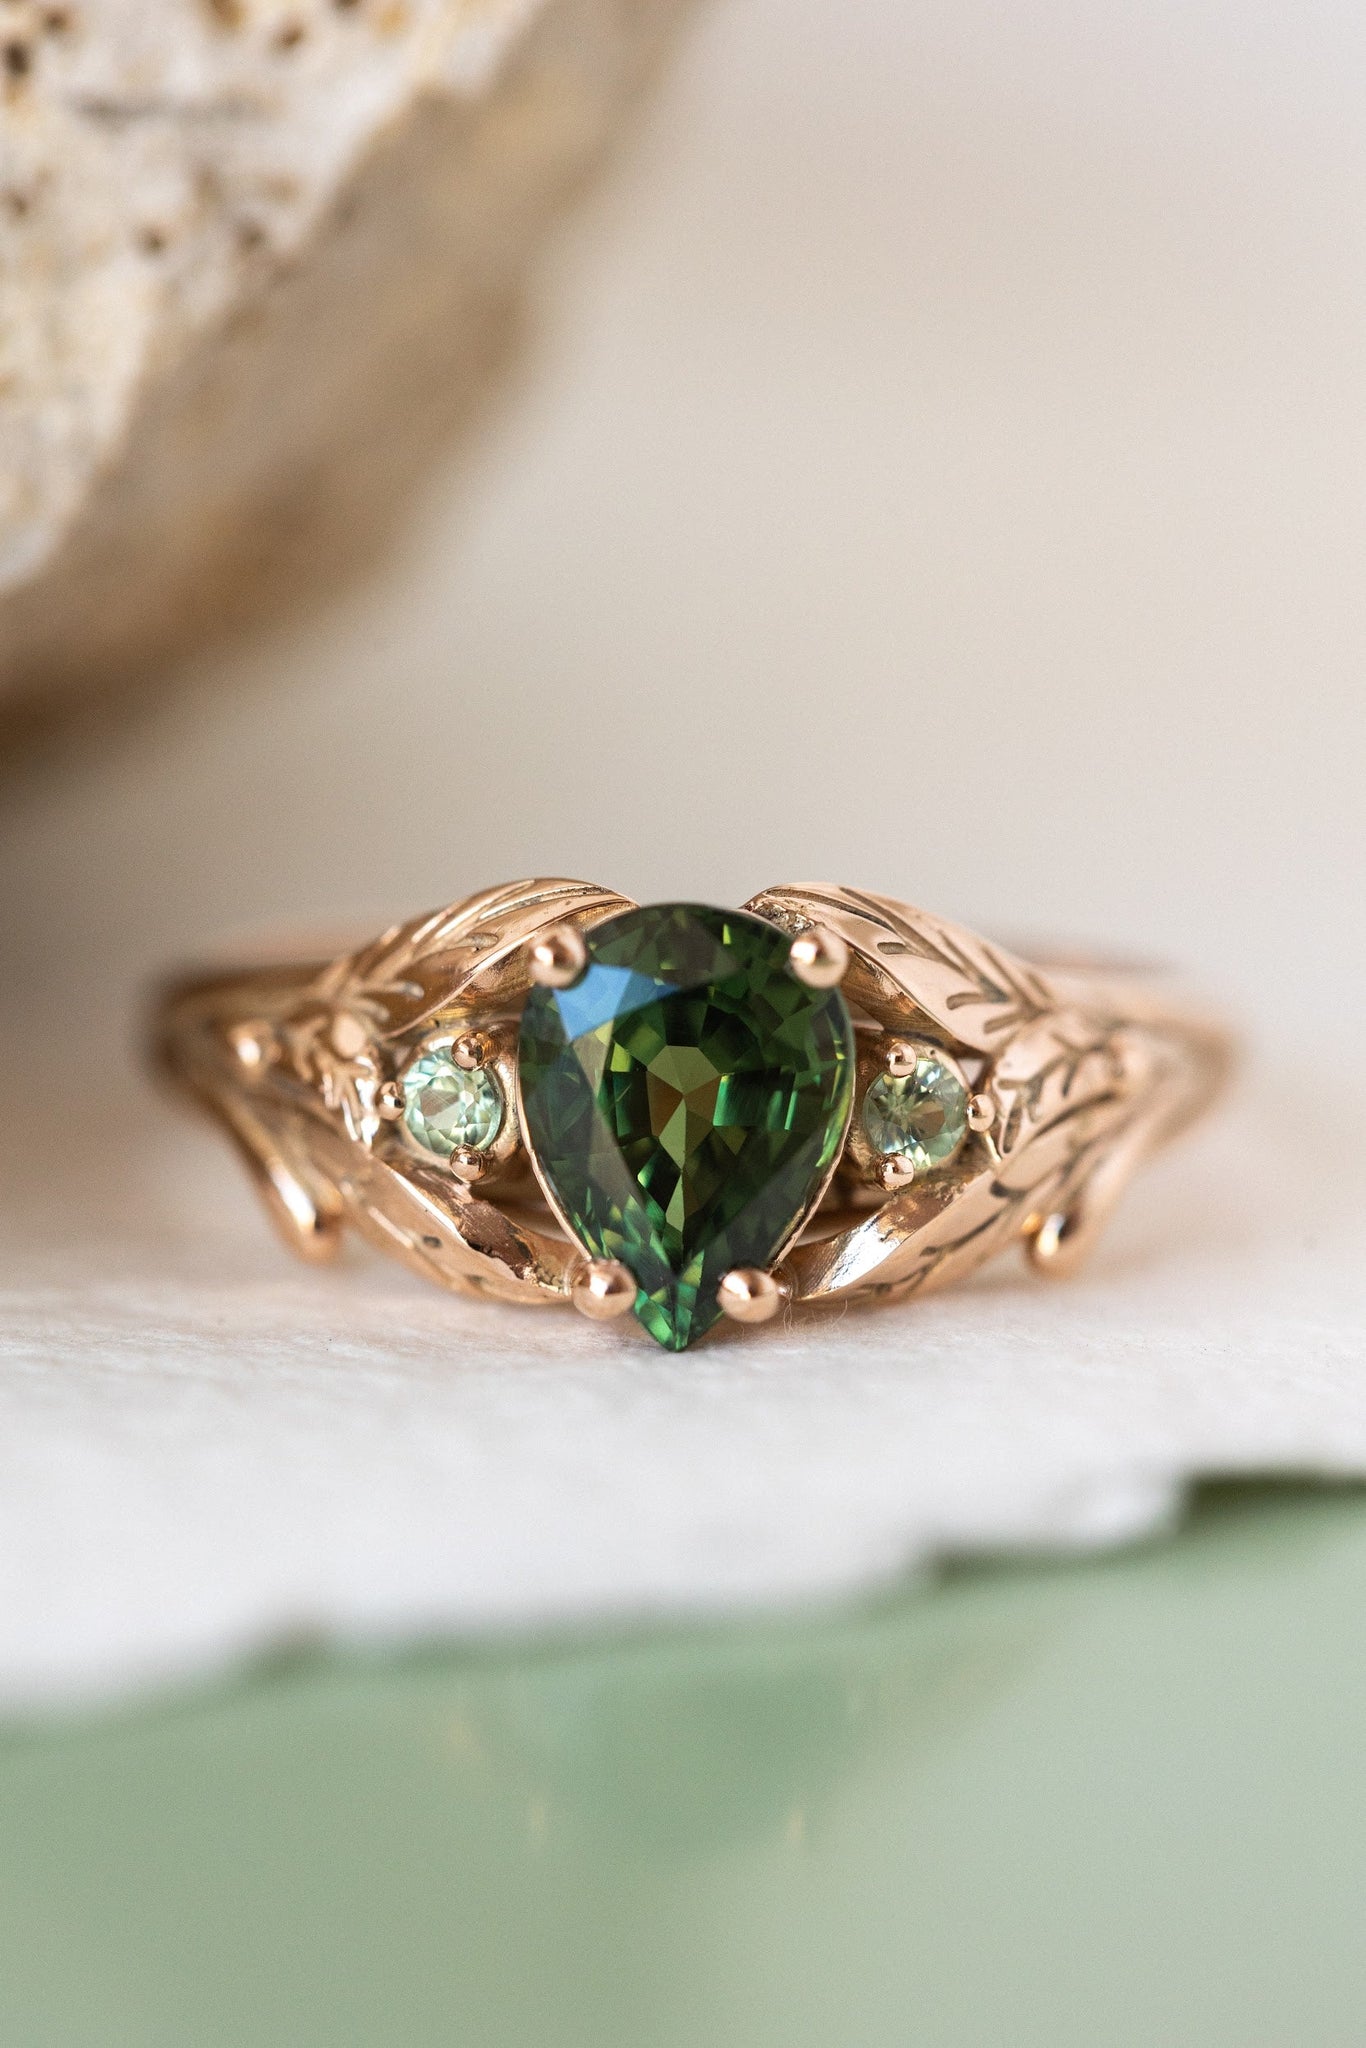 Oval Emerald Ring, 2 Carats 68 Mm Oval Cut Three Stone Style Emerald Engagement  Ring, May Birthstone Promise Ring, Green Gemstone Ring - Etsy